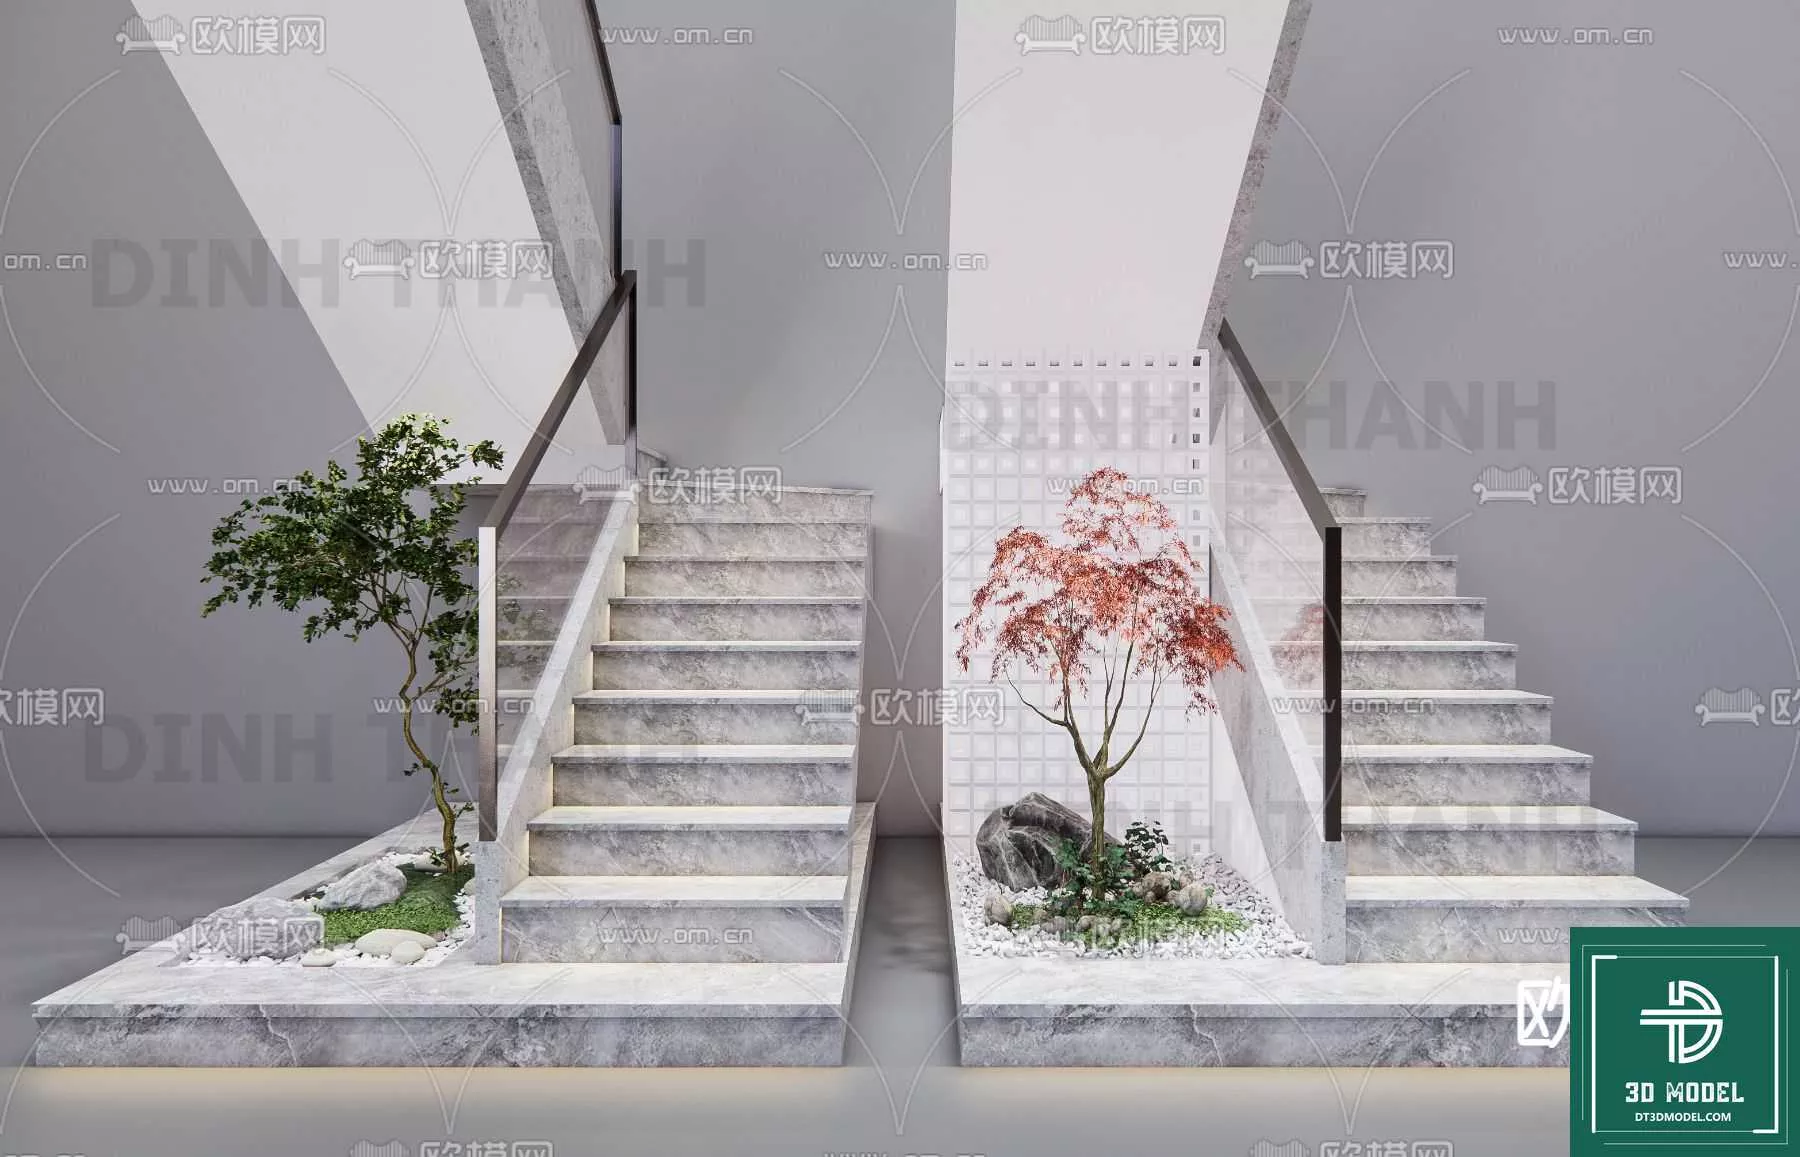 MODERN STAIR - SKETCHUP 3D MODEL - VRAY OR ENSCAPE - ID14188